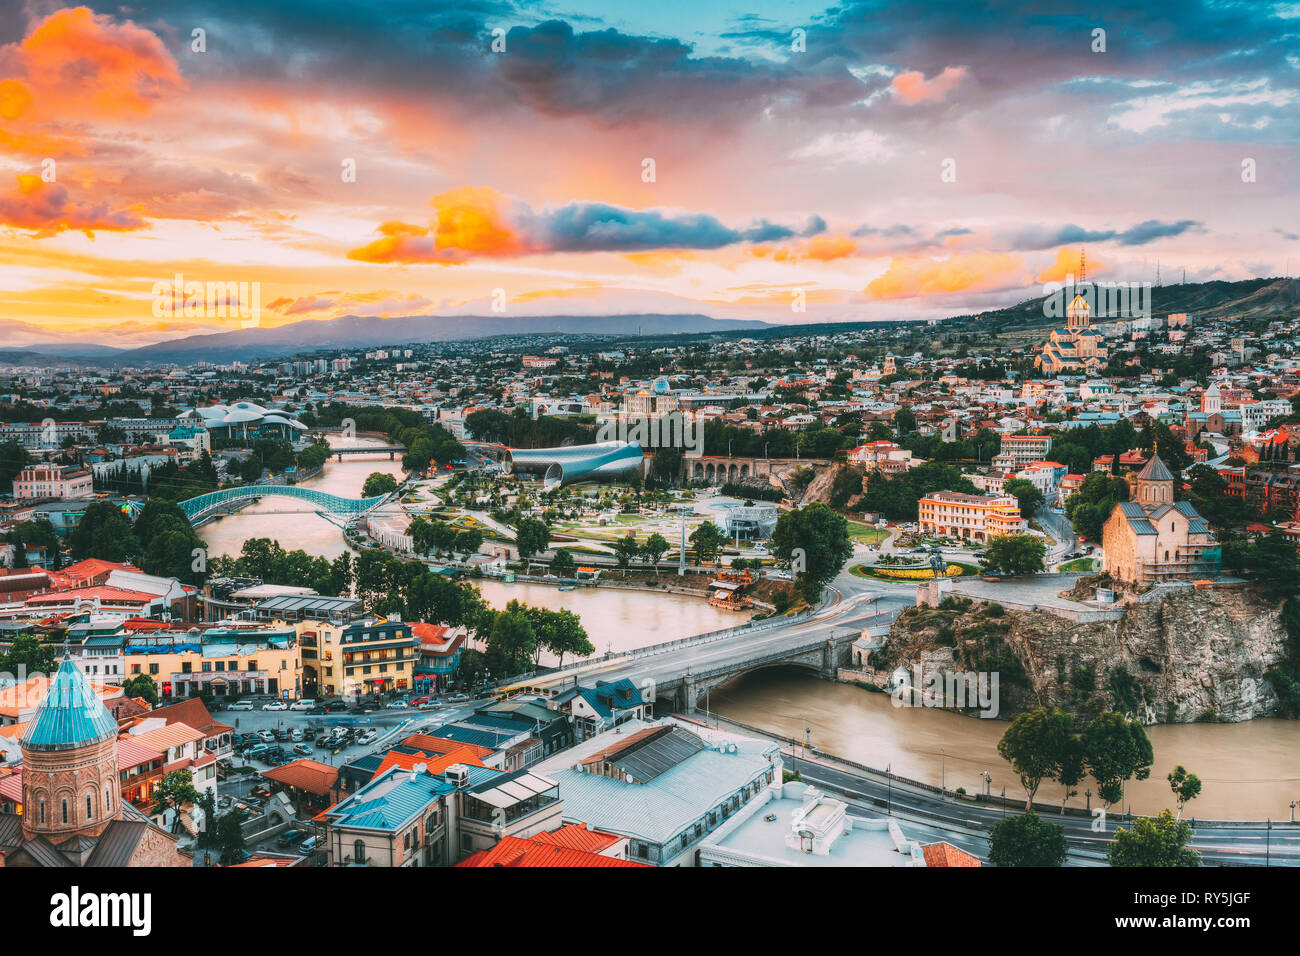 Evening View Of Tbilisi At Colorful Sunset. Georgia. Summer Cityscape. Stock Photo